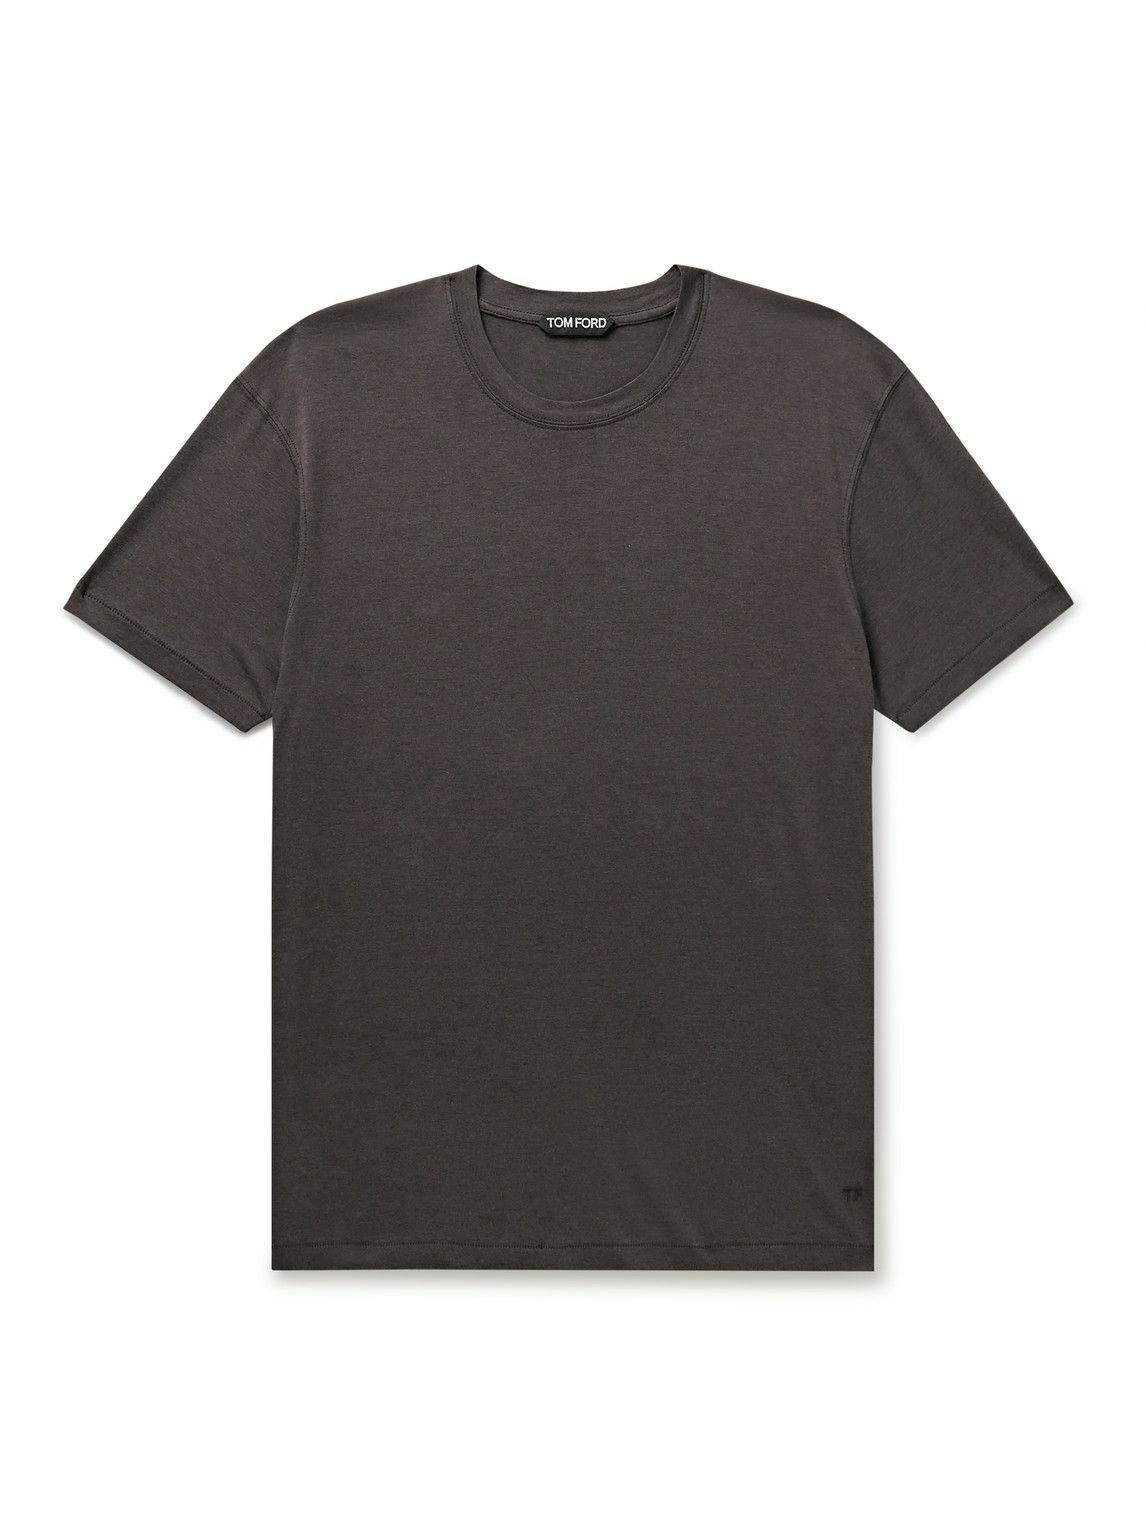 TOM FORD - Slim-Fit Lyocell and Cotton-Blend Jersey T-Shirt - Brown TOM ...